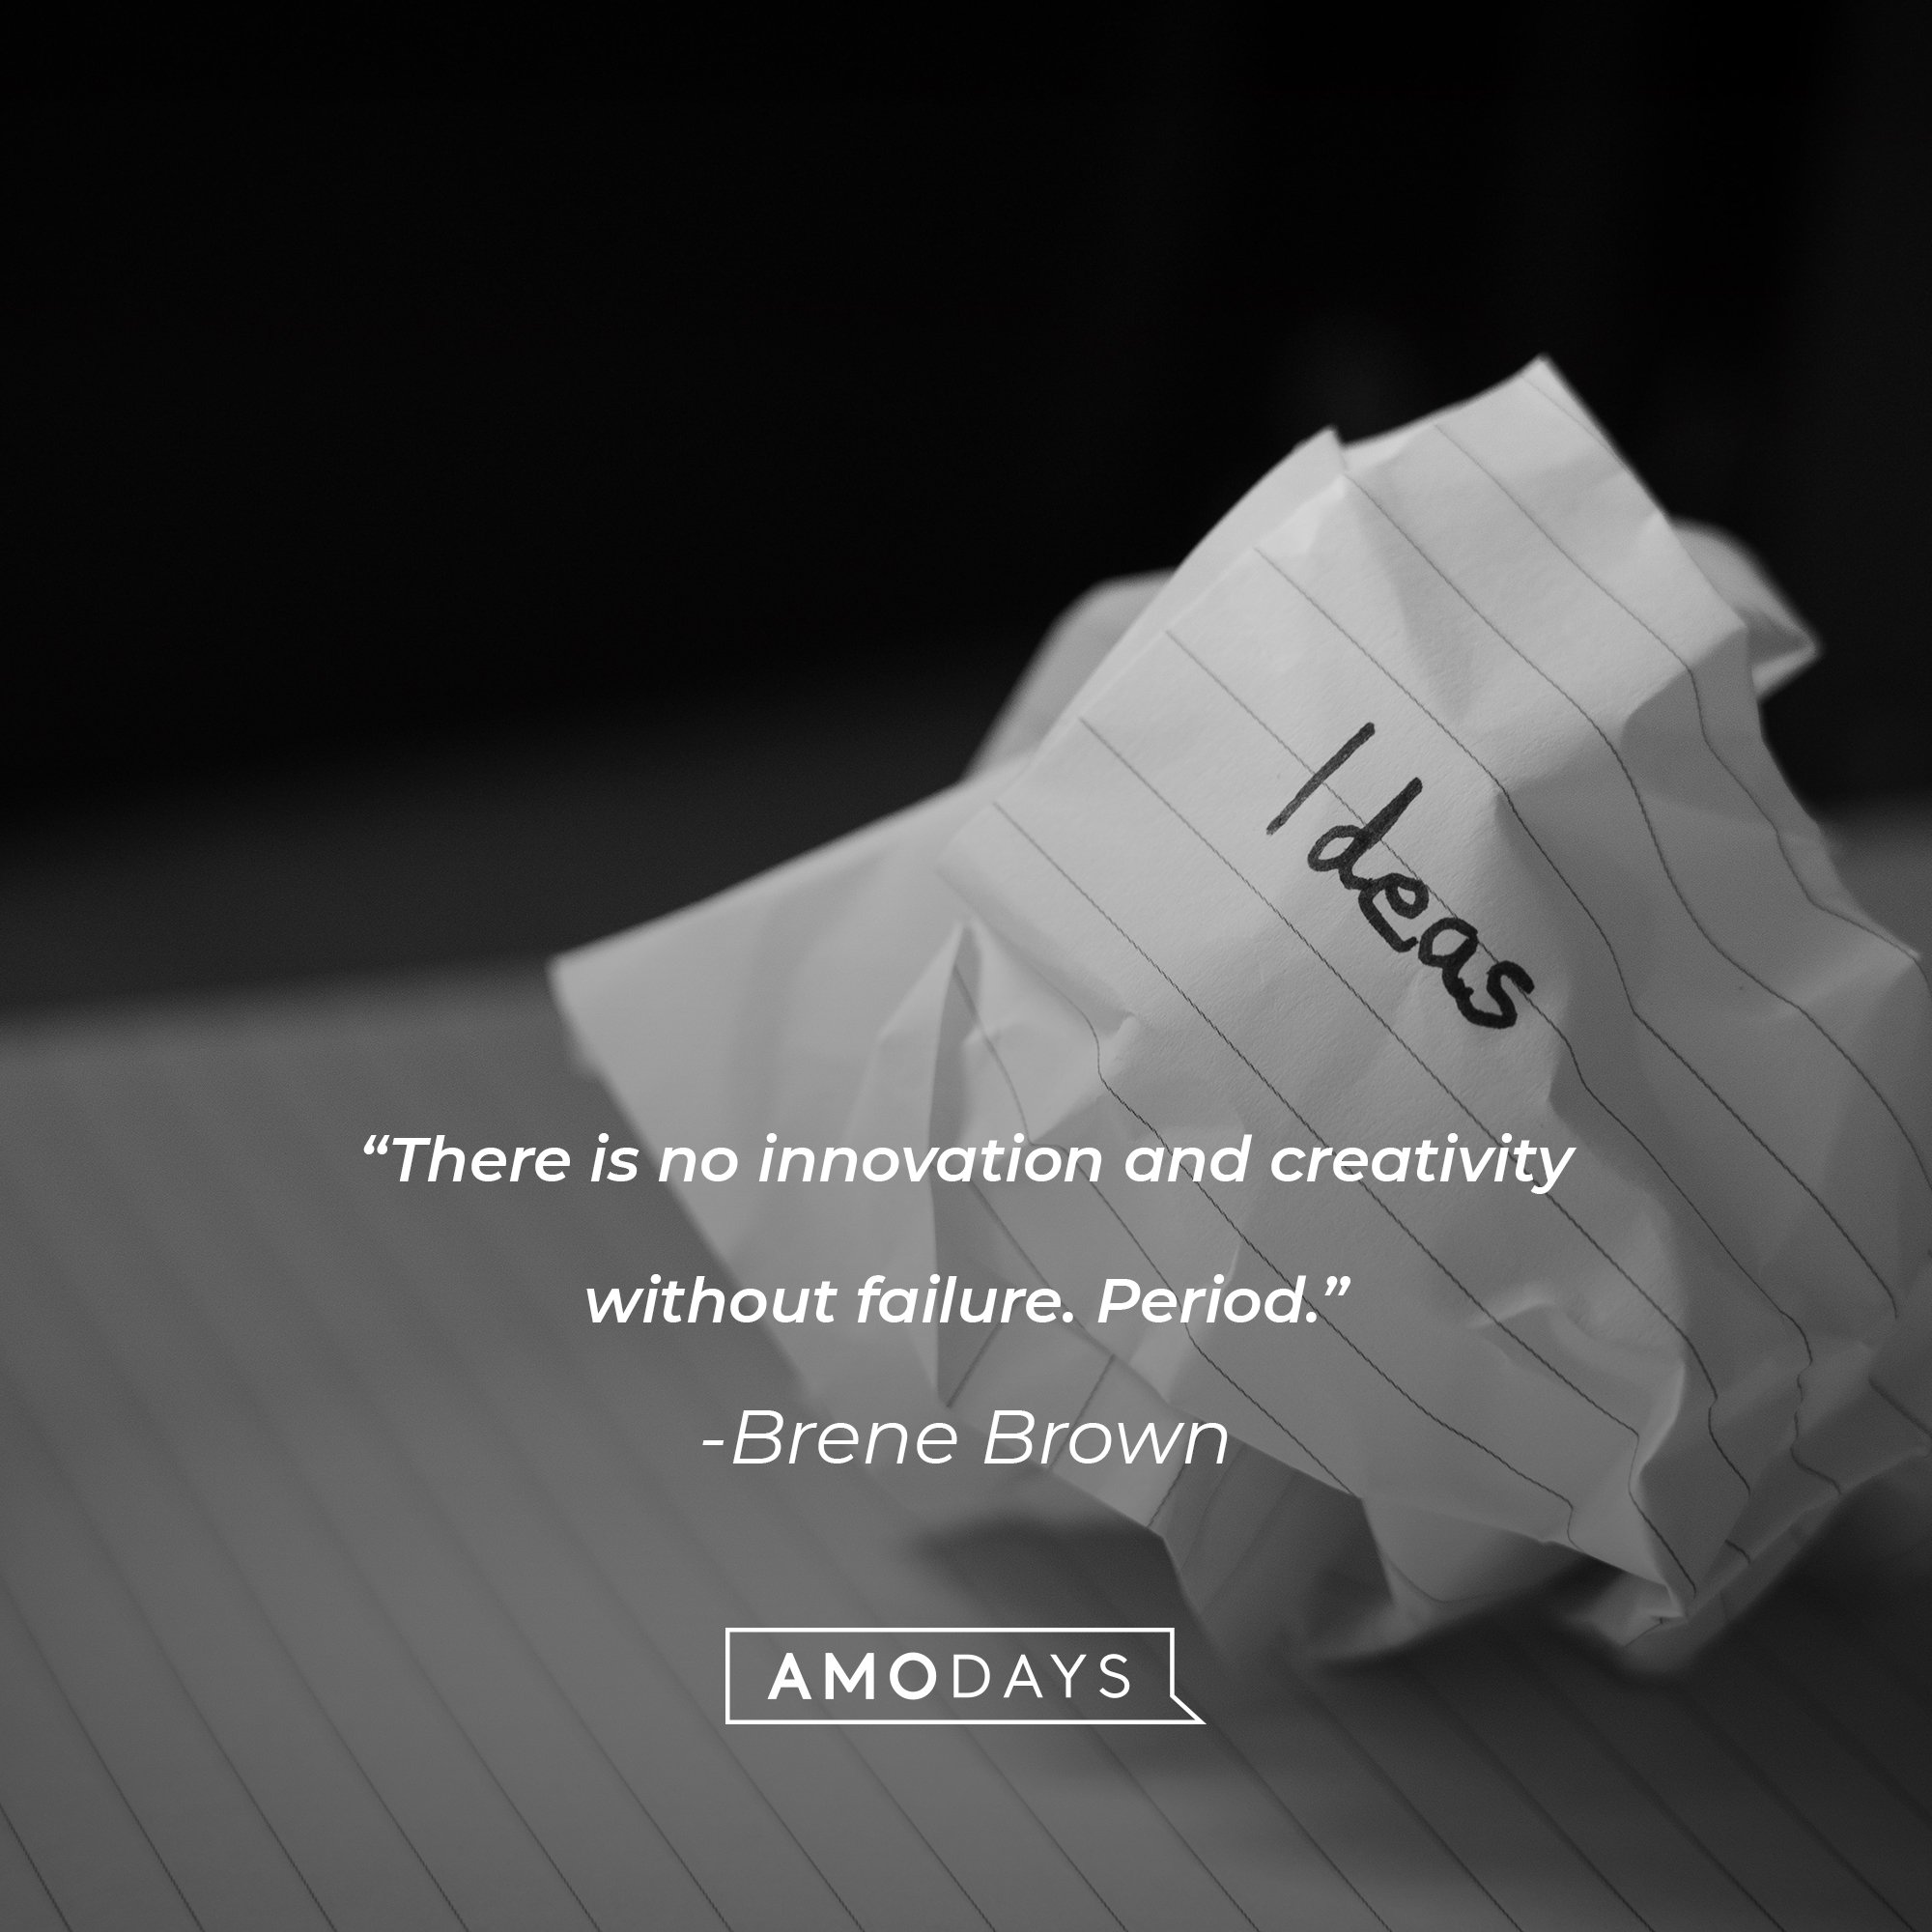 Brene Brown's quote: "There is no innovation and creativity without failure. Period." | Image: AmoDays